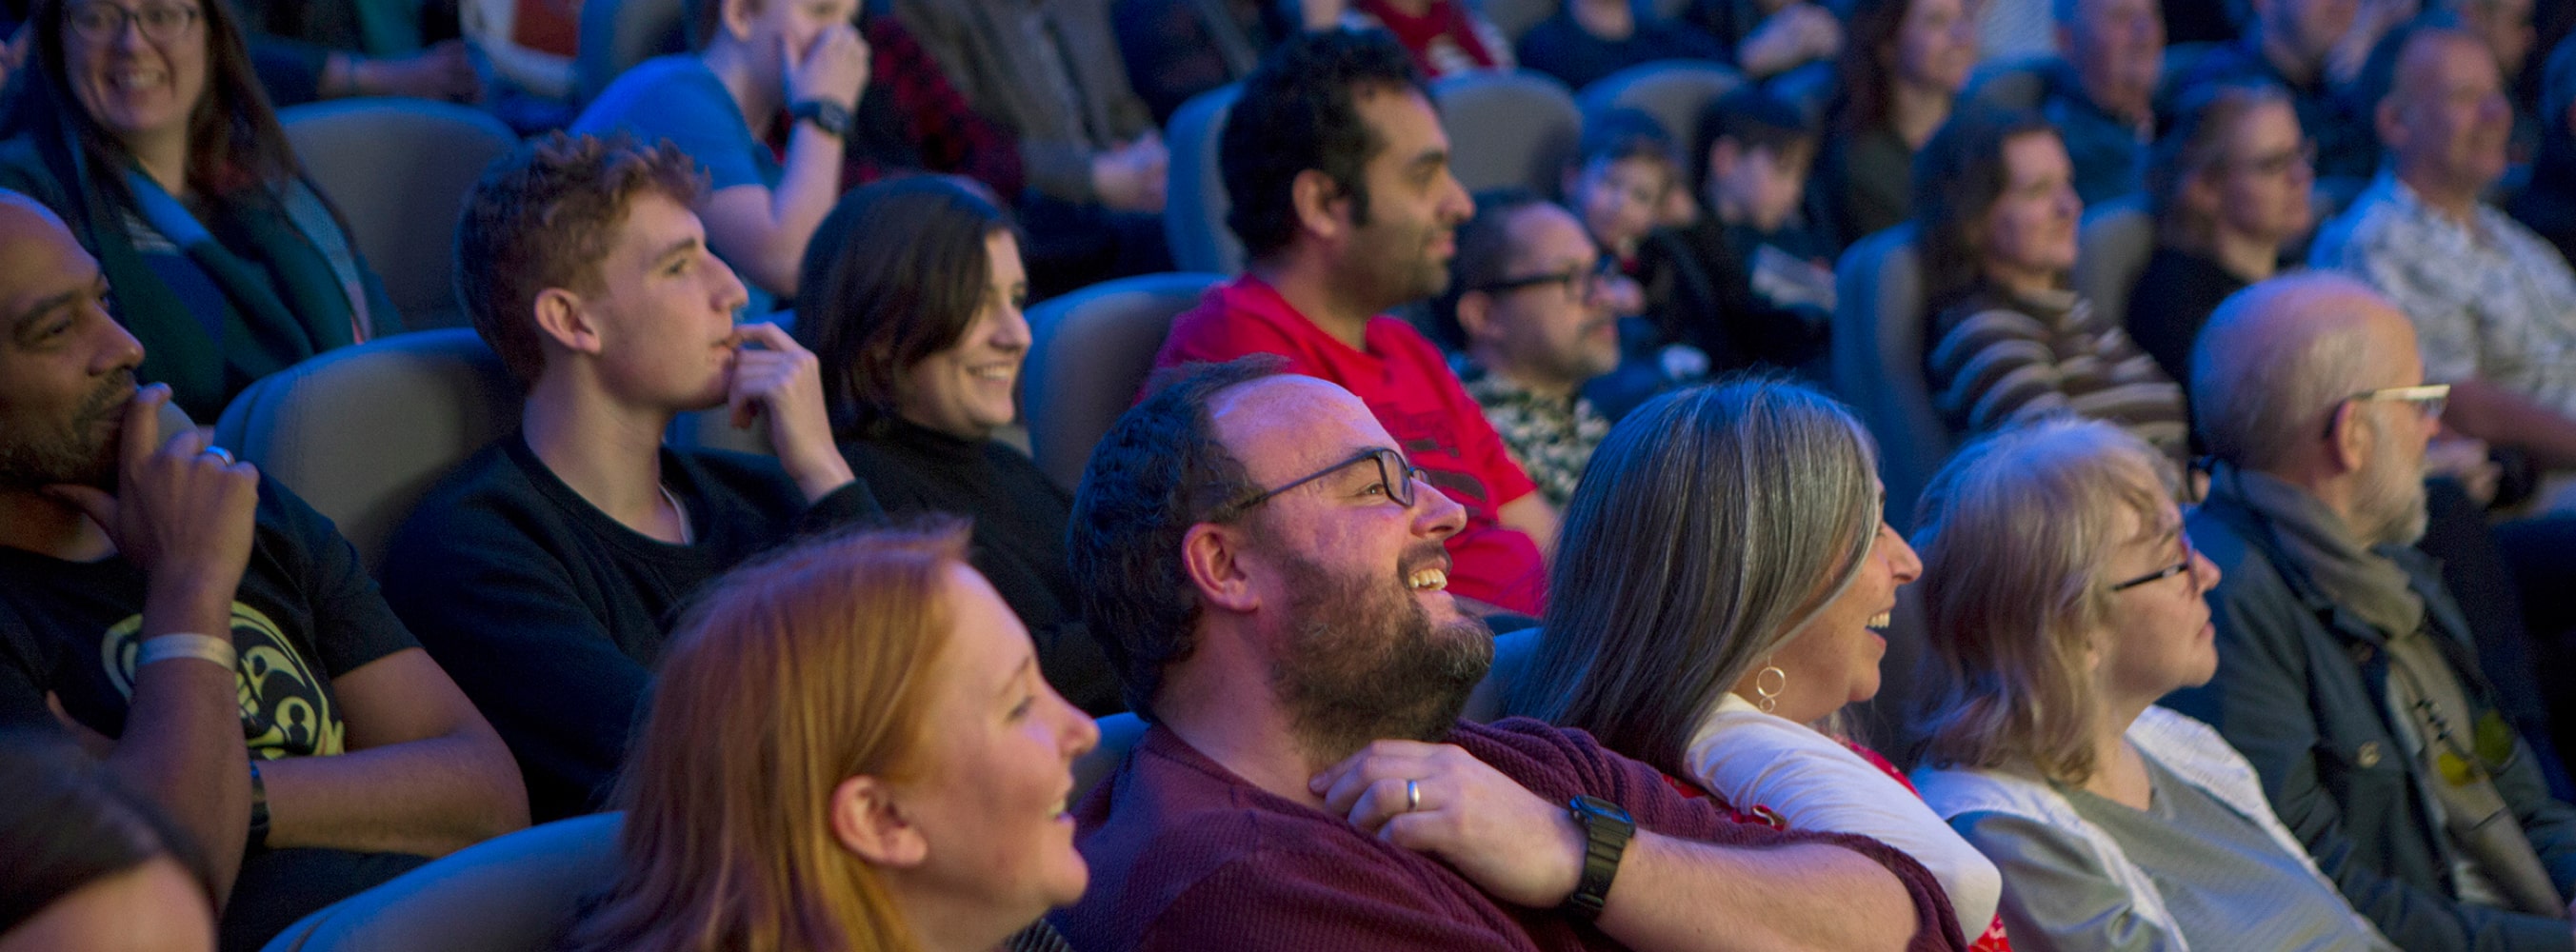 A laughing crowd at a British Library event